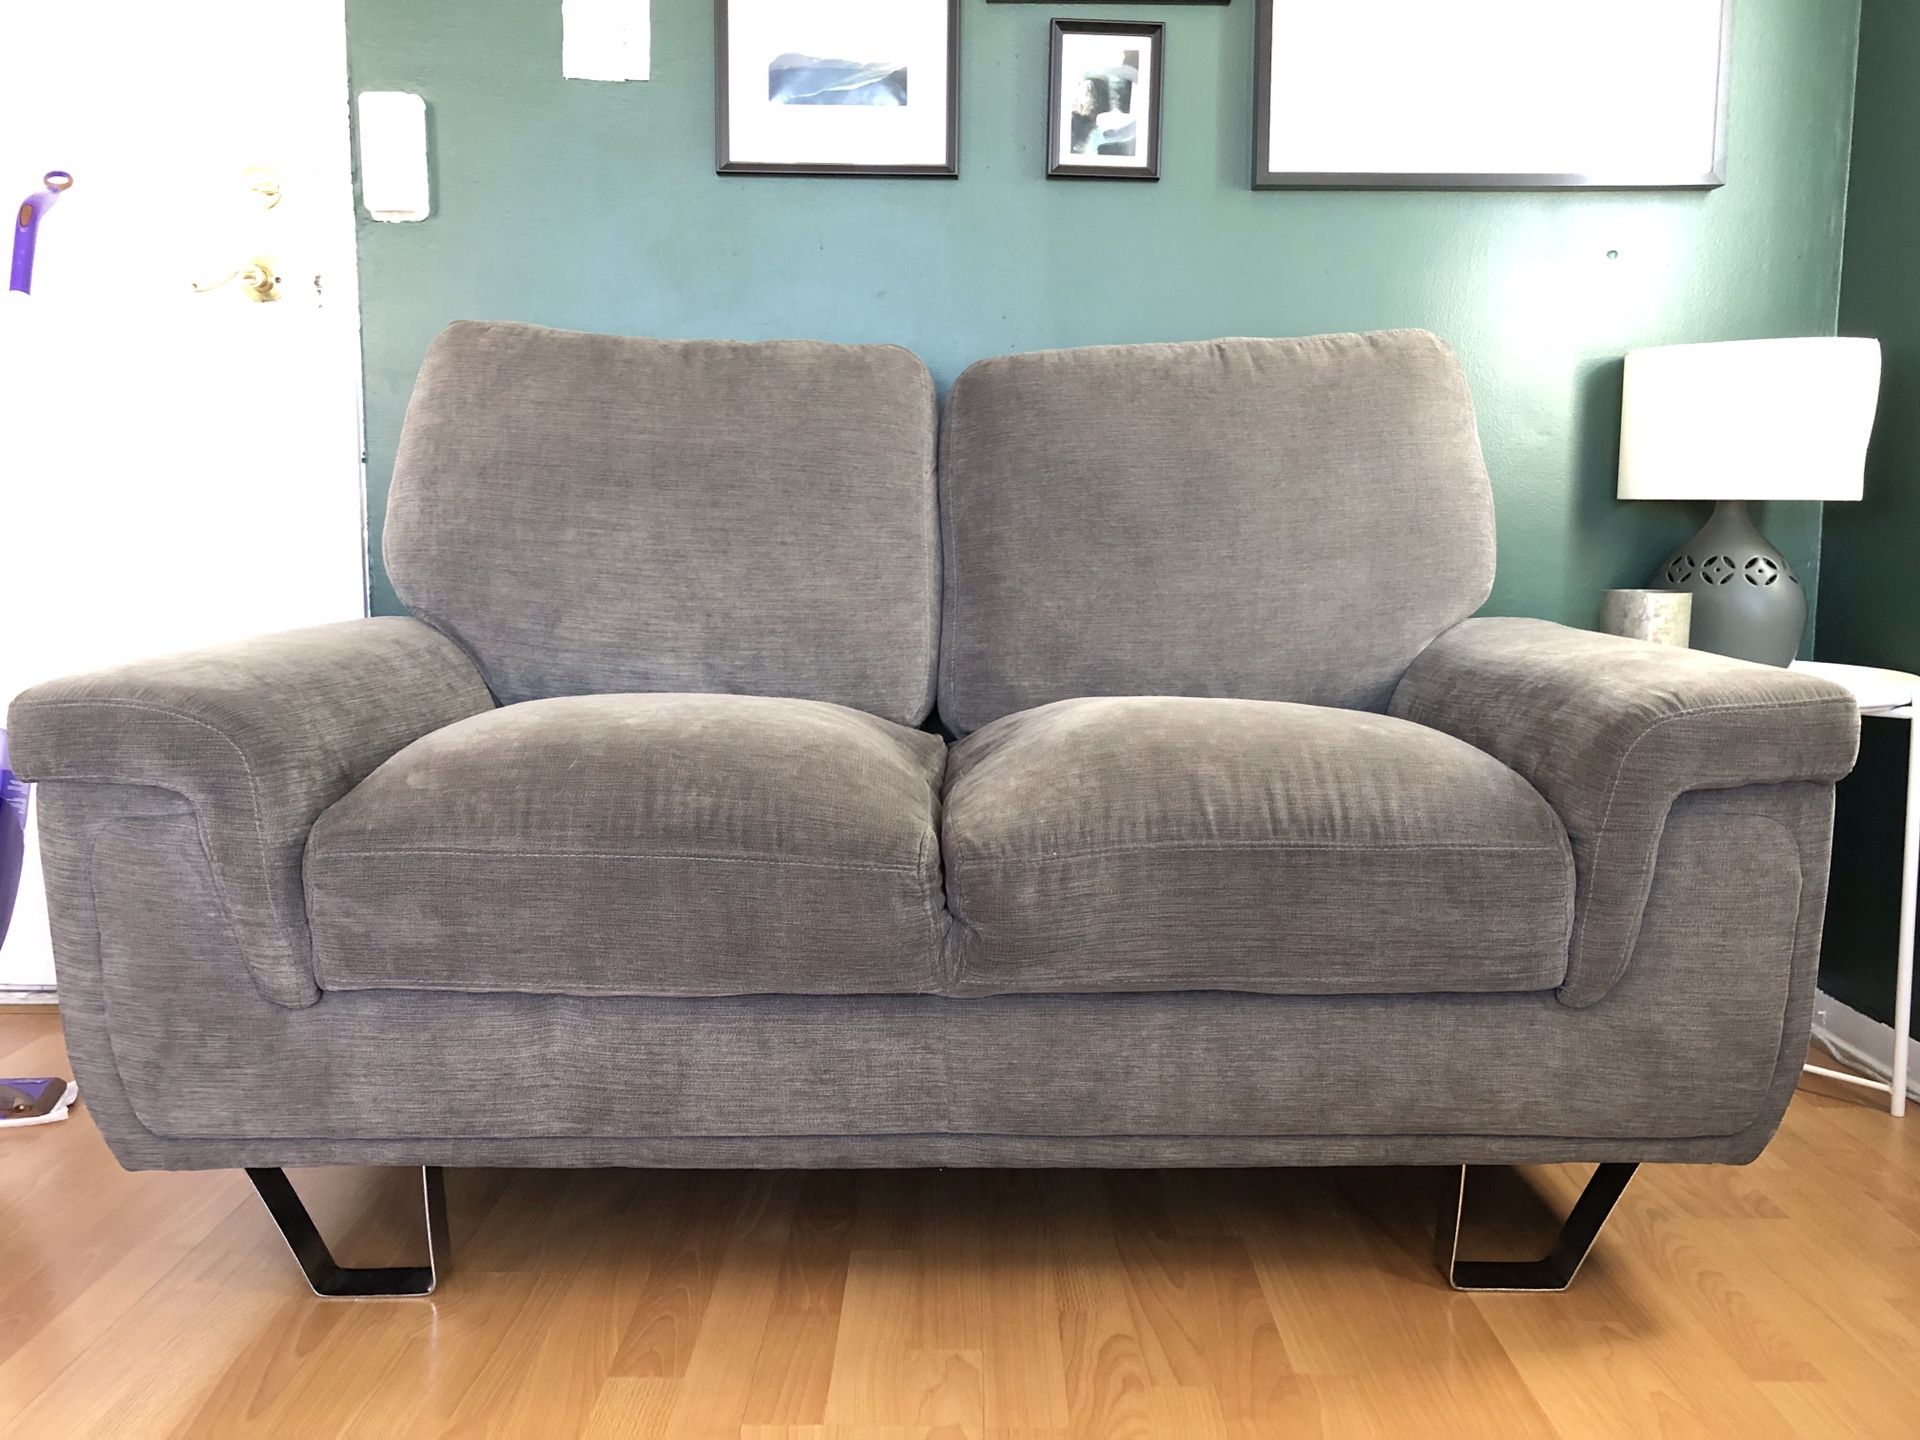 Loveseat couch / sofa